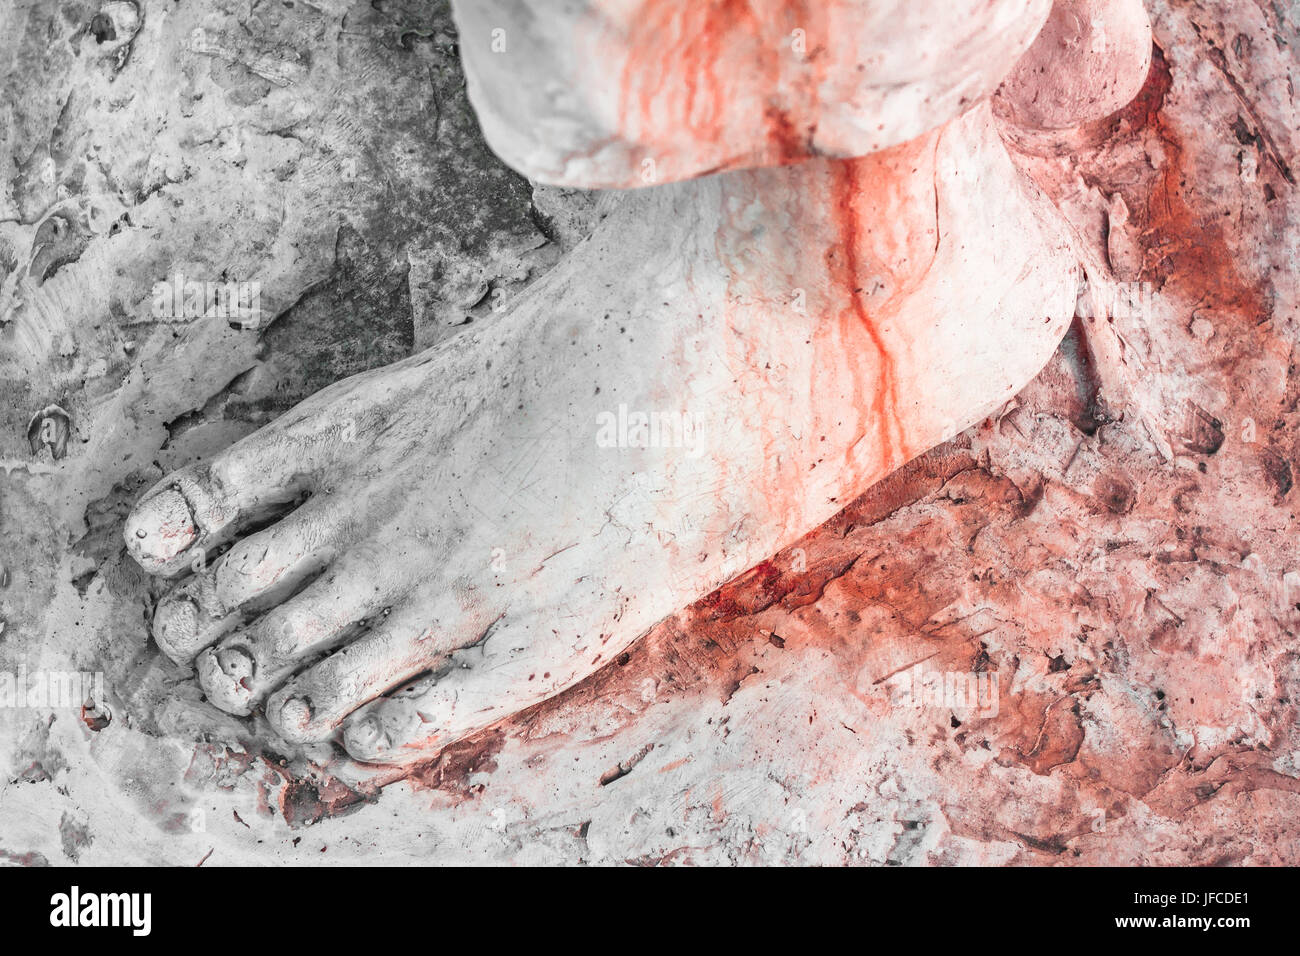 Foot of Christ bloodied Stock Photo